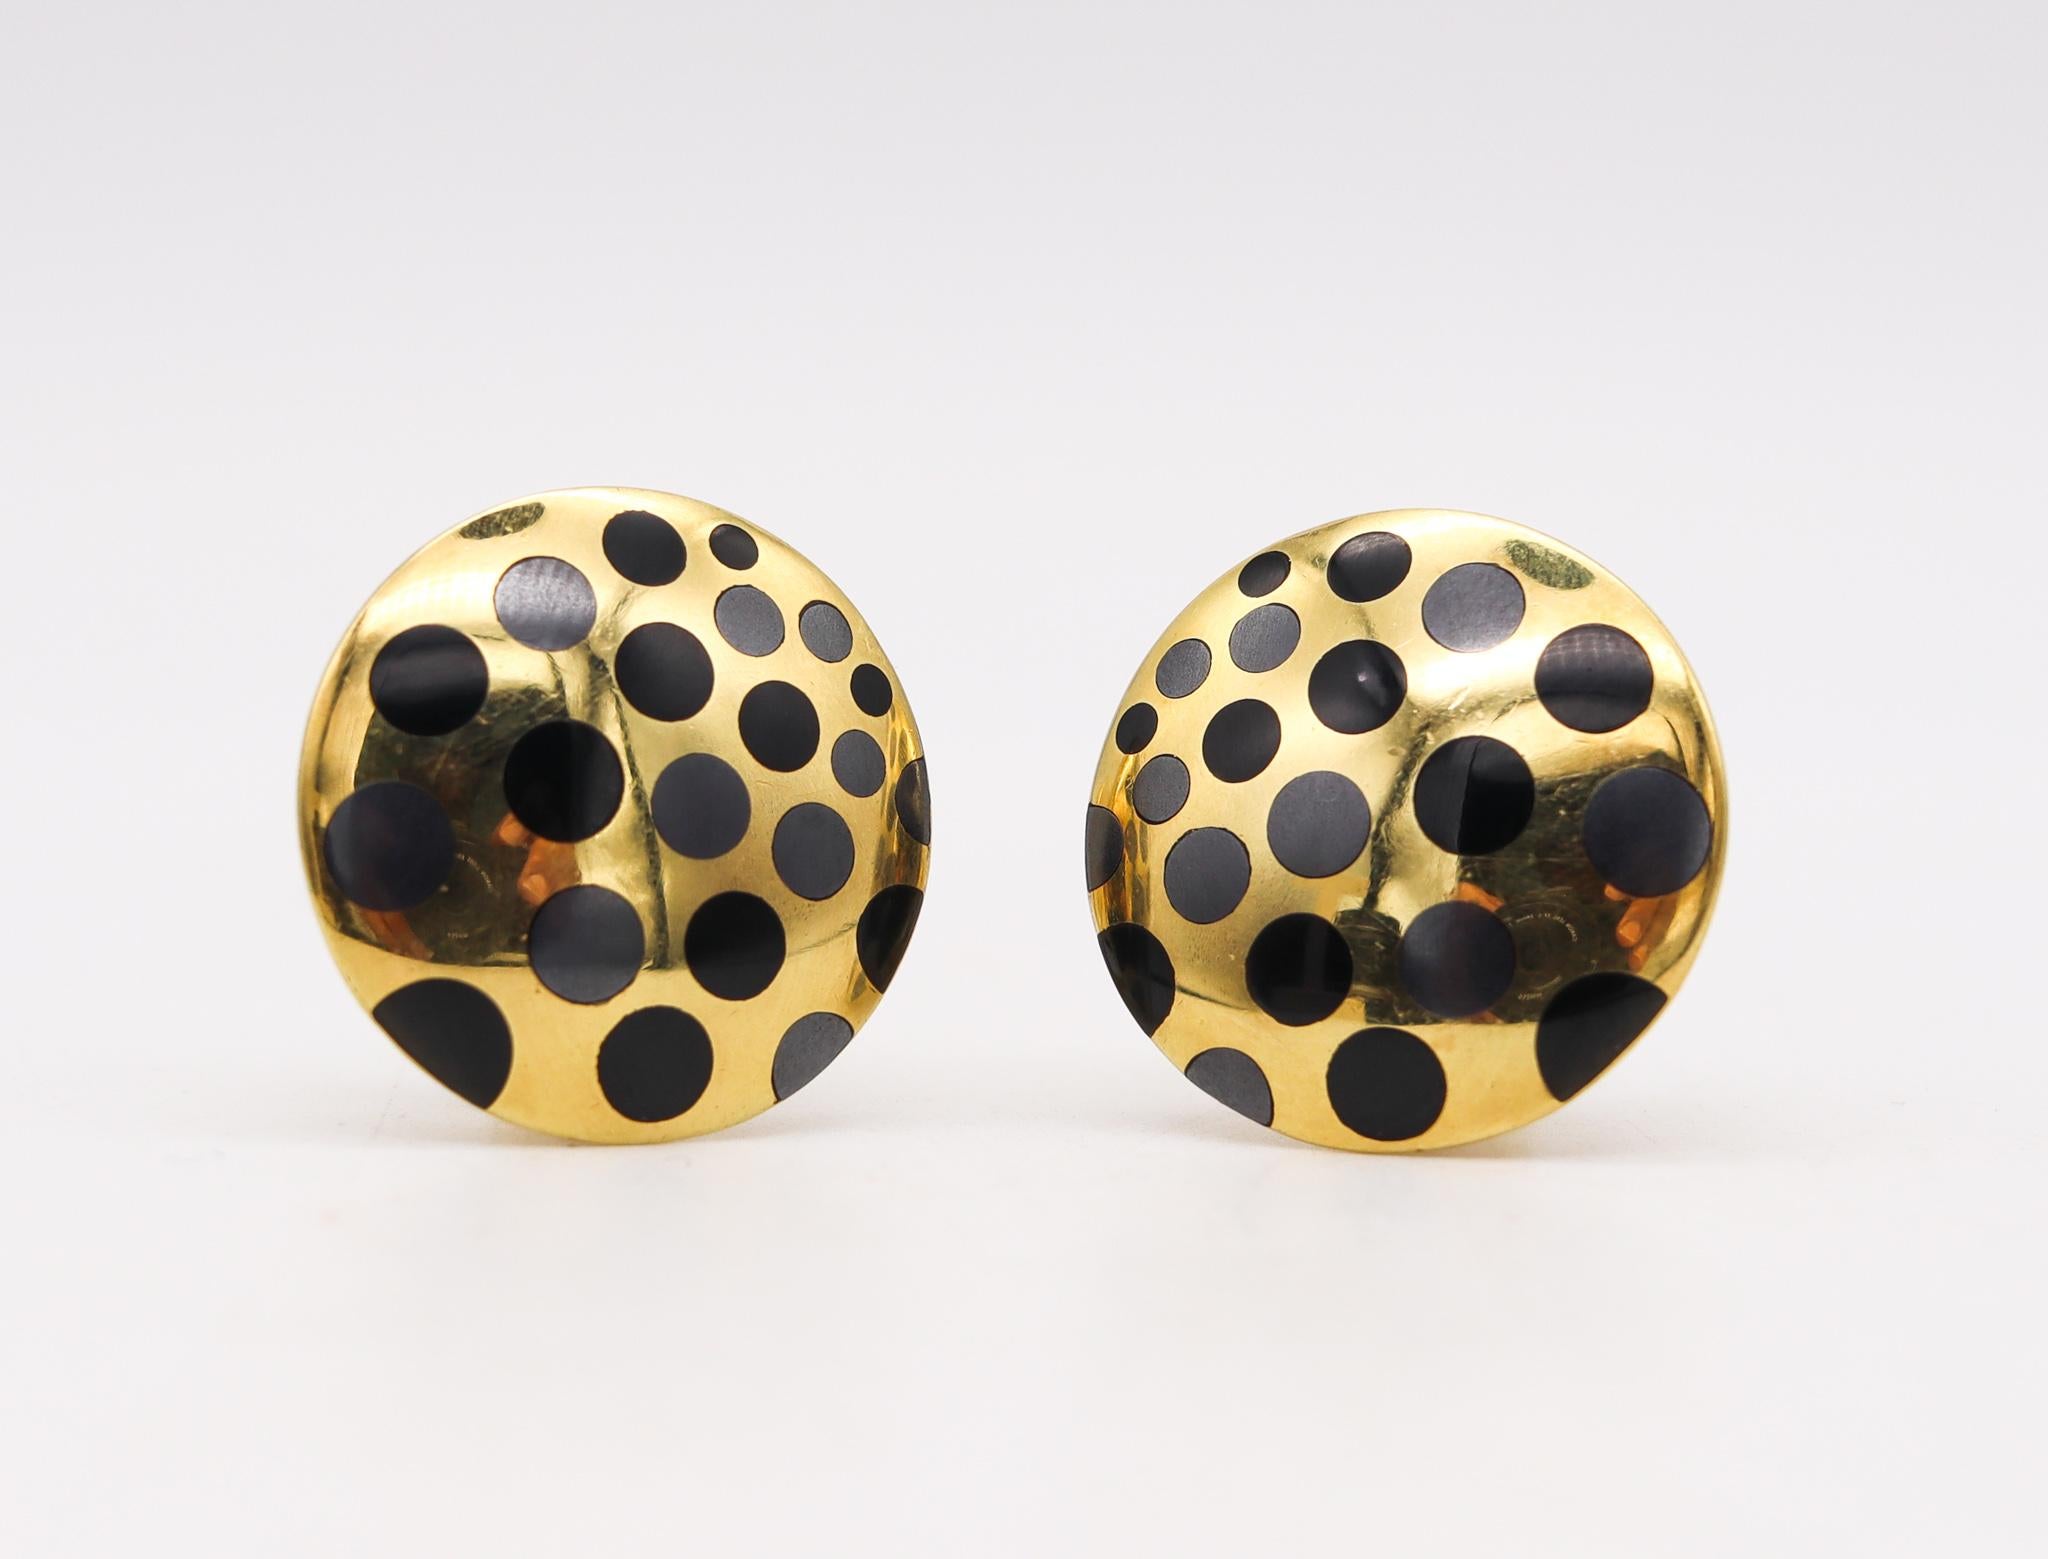 Geometric dotted clip earrings designed by Angela Cummings.

Very beautiful pair, created by Angela Cummings at her studio in New York, back, back in the early 1980's. These very modernist round clips earrings has been crafted in solid yellow gold